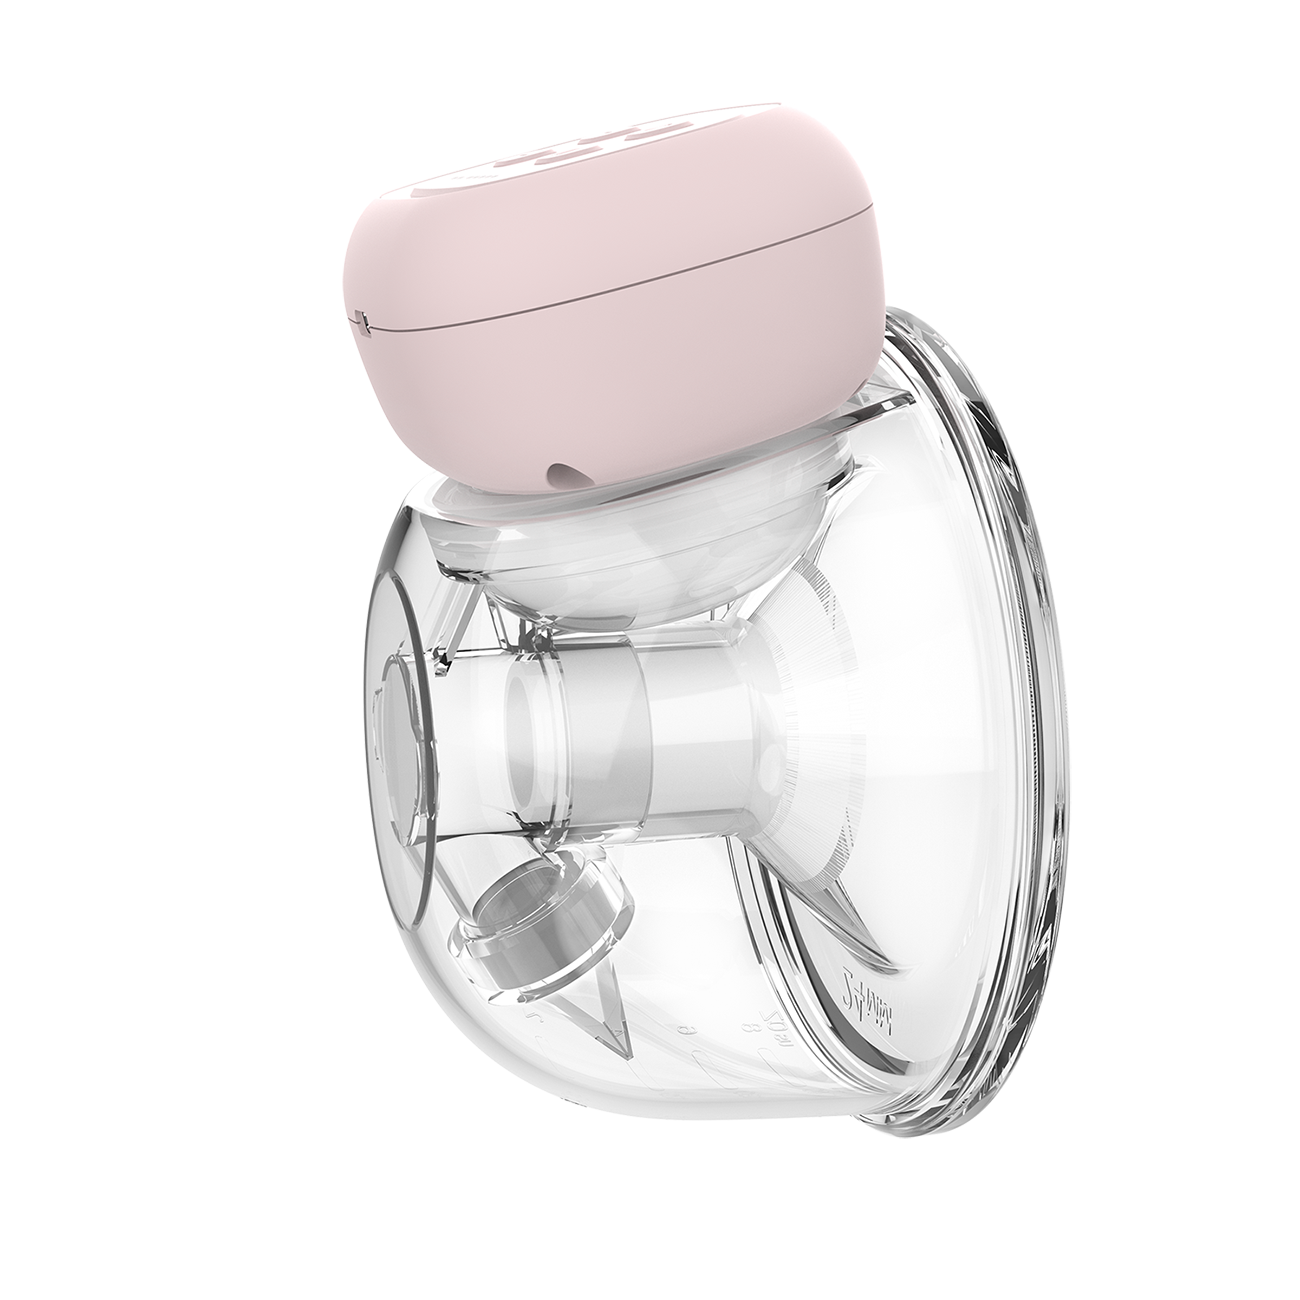 Totmizby Wearable Breast Pump, Double Hands-Free Remote Control